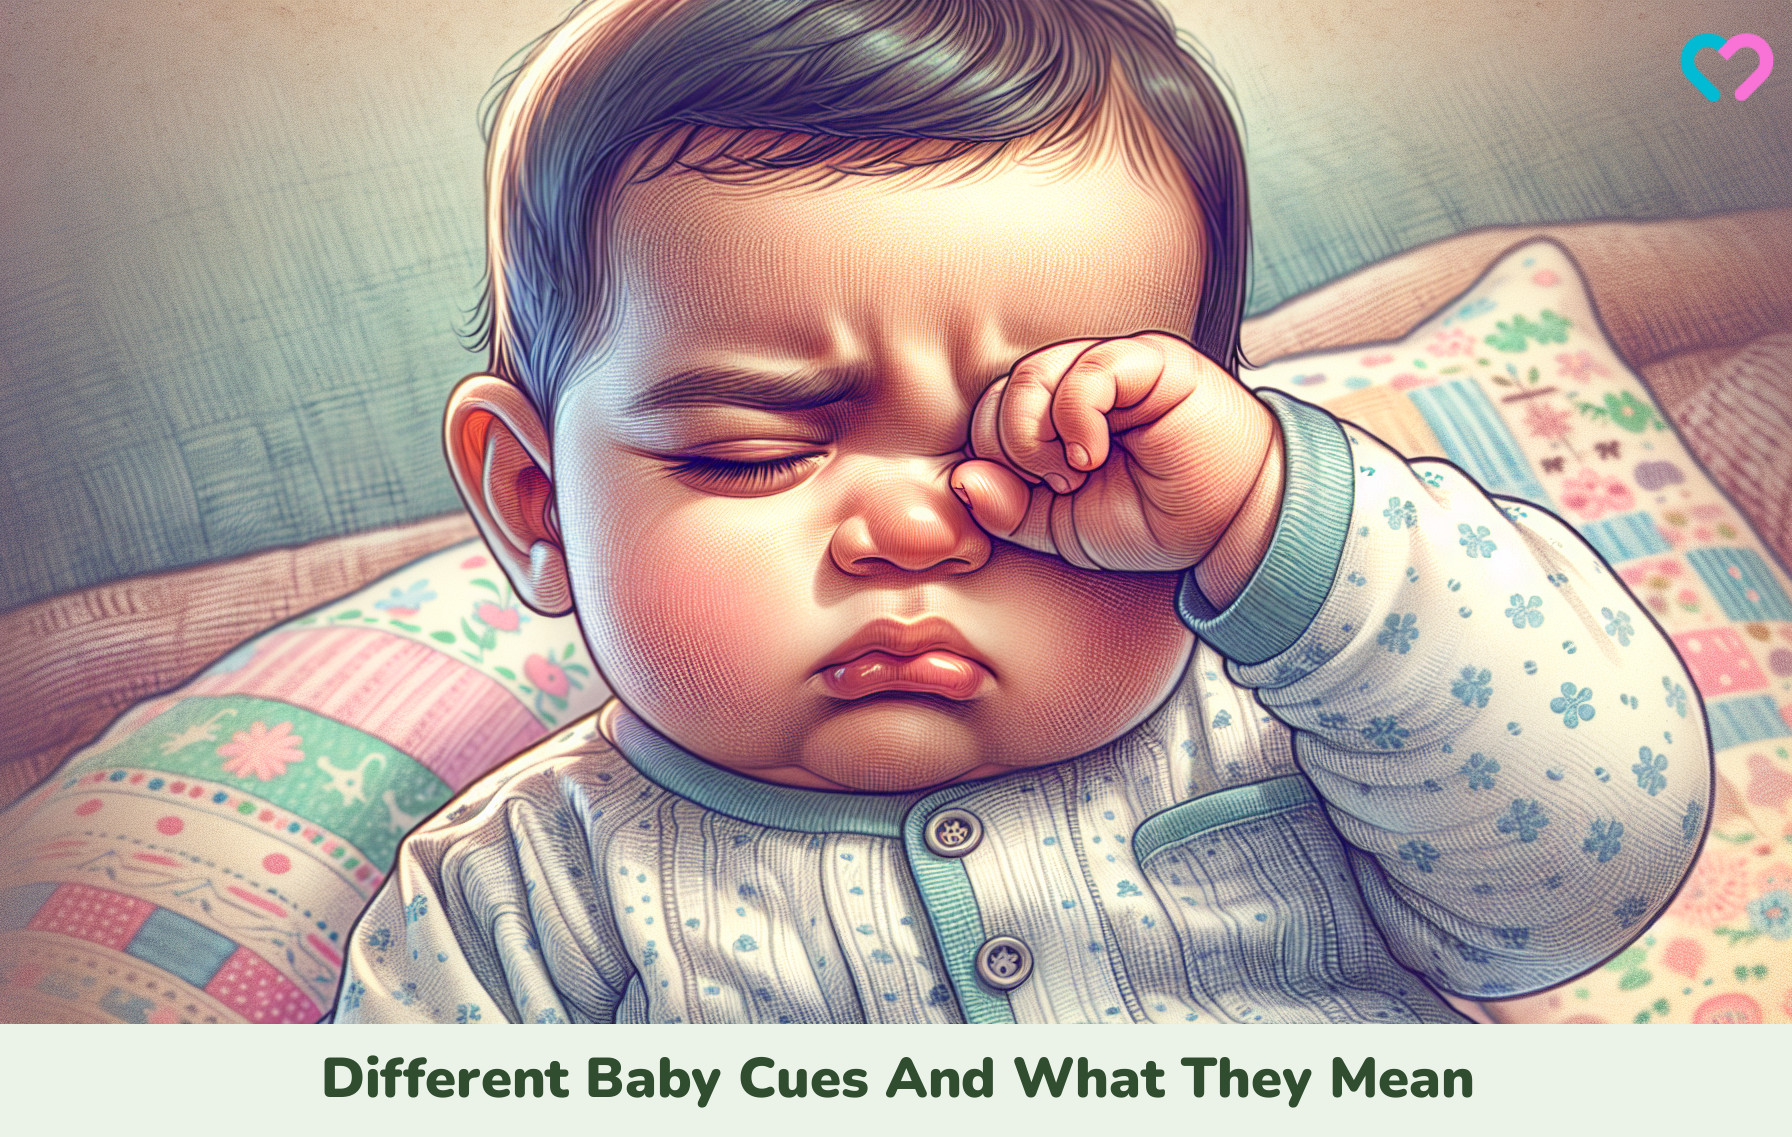 Baby Body Cues And Their Meaning_illustration